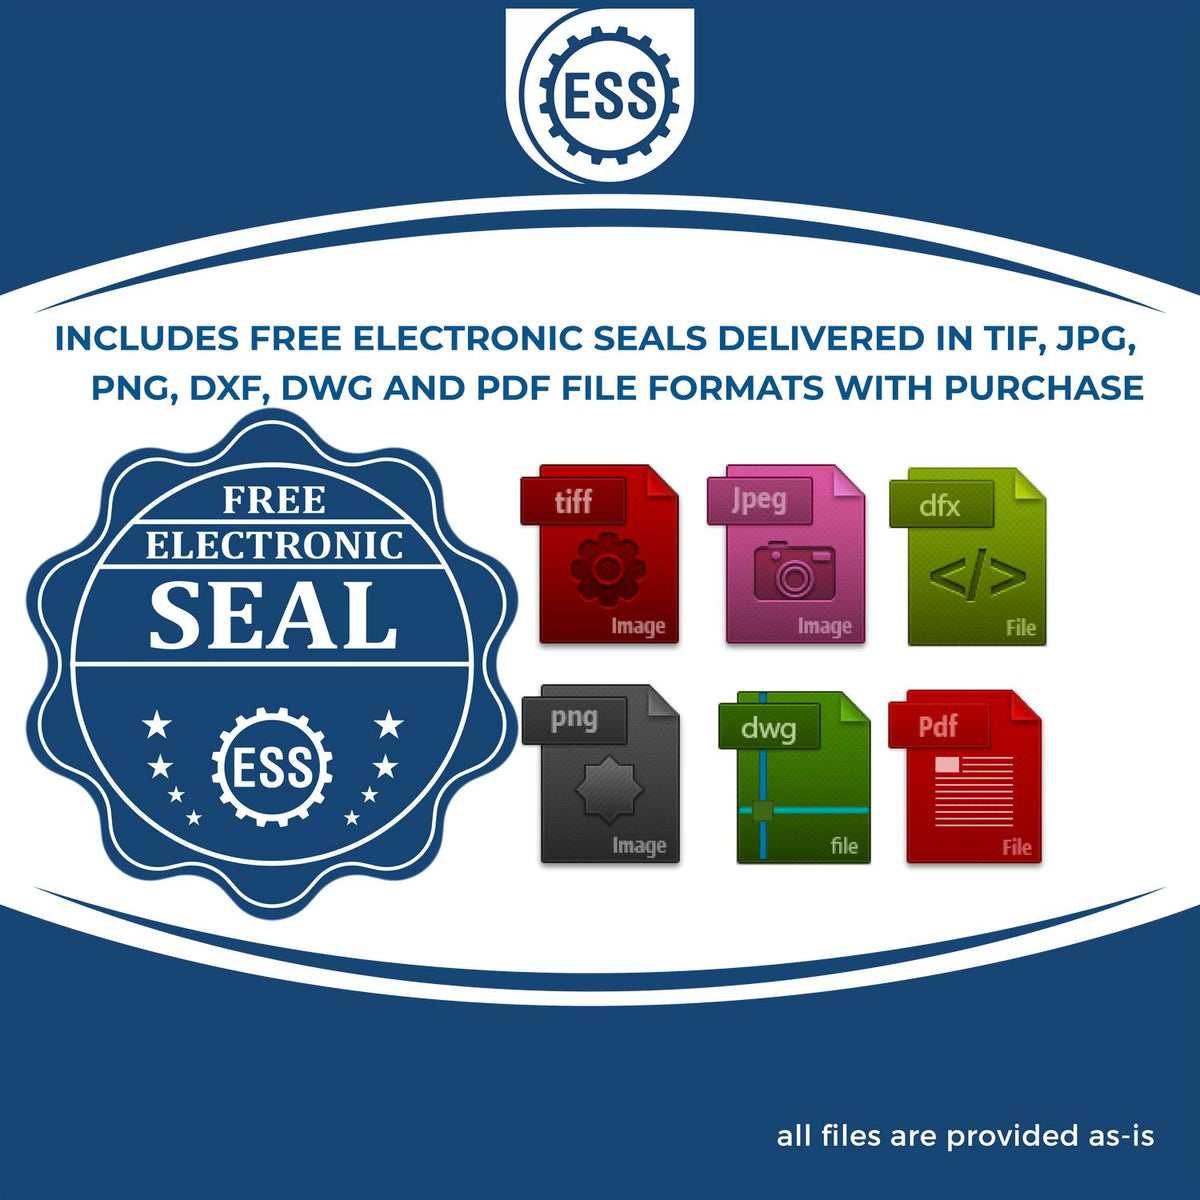 An infographic for the free electronic seal for the Long Reach South Carolina PE Seal illustrating the different file type icons such as DXF, DWG, TIF, JPG and PNG.